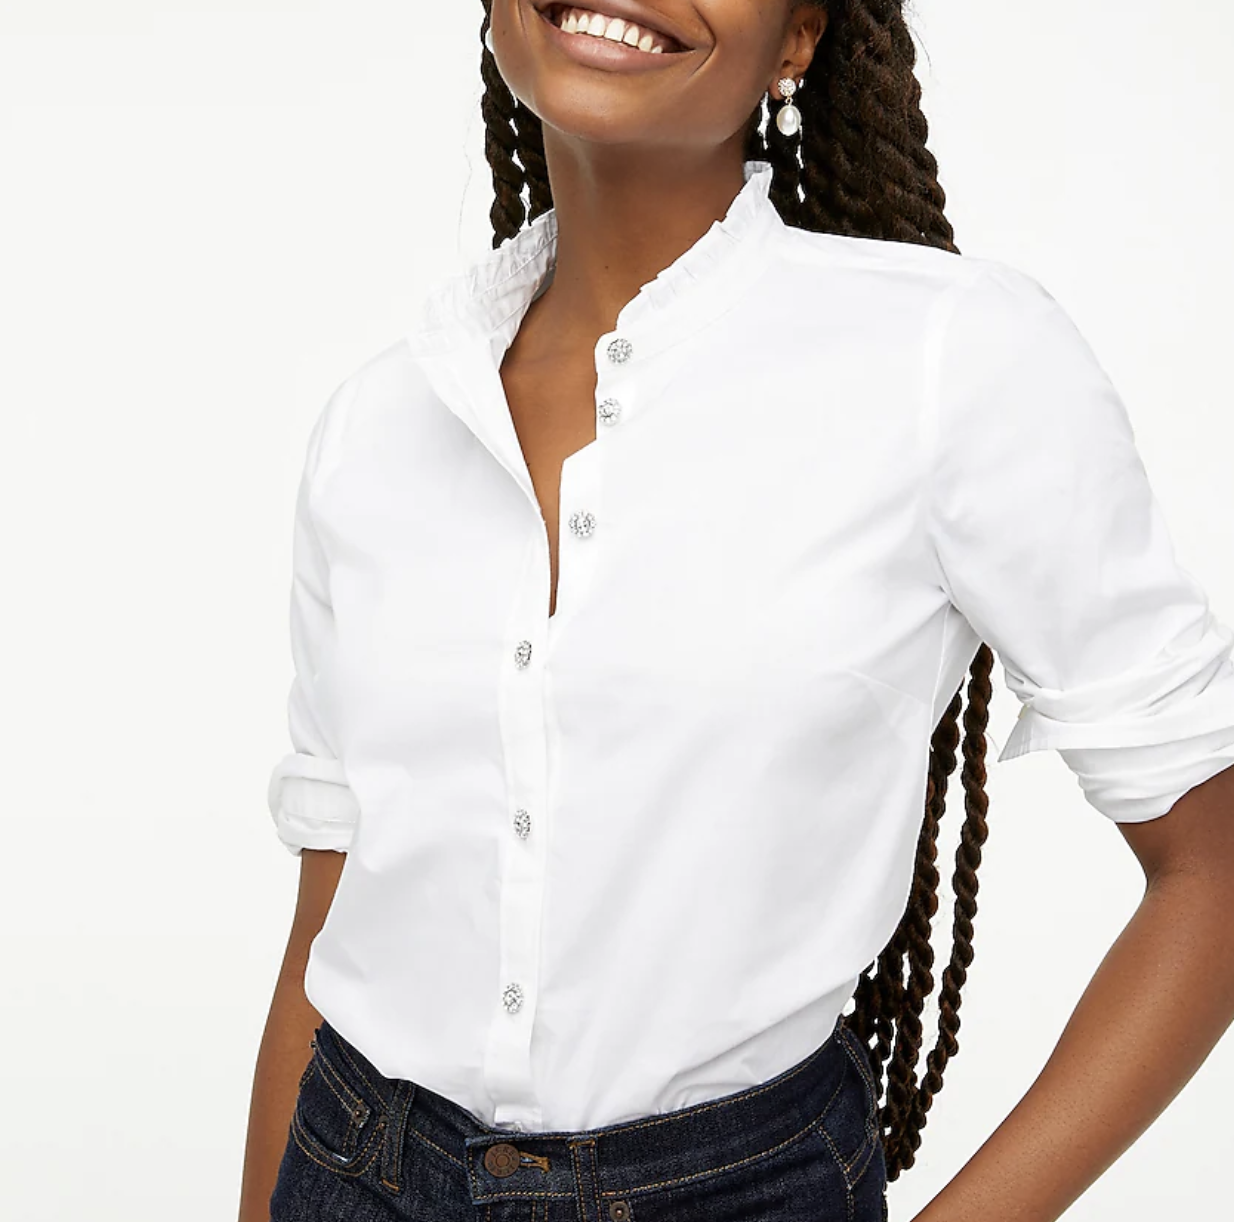 Model wearing white cotton poplin top with jewel buttons